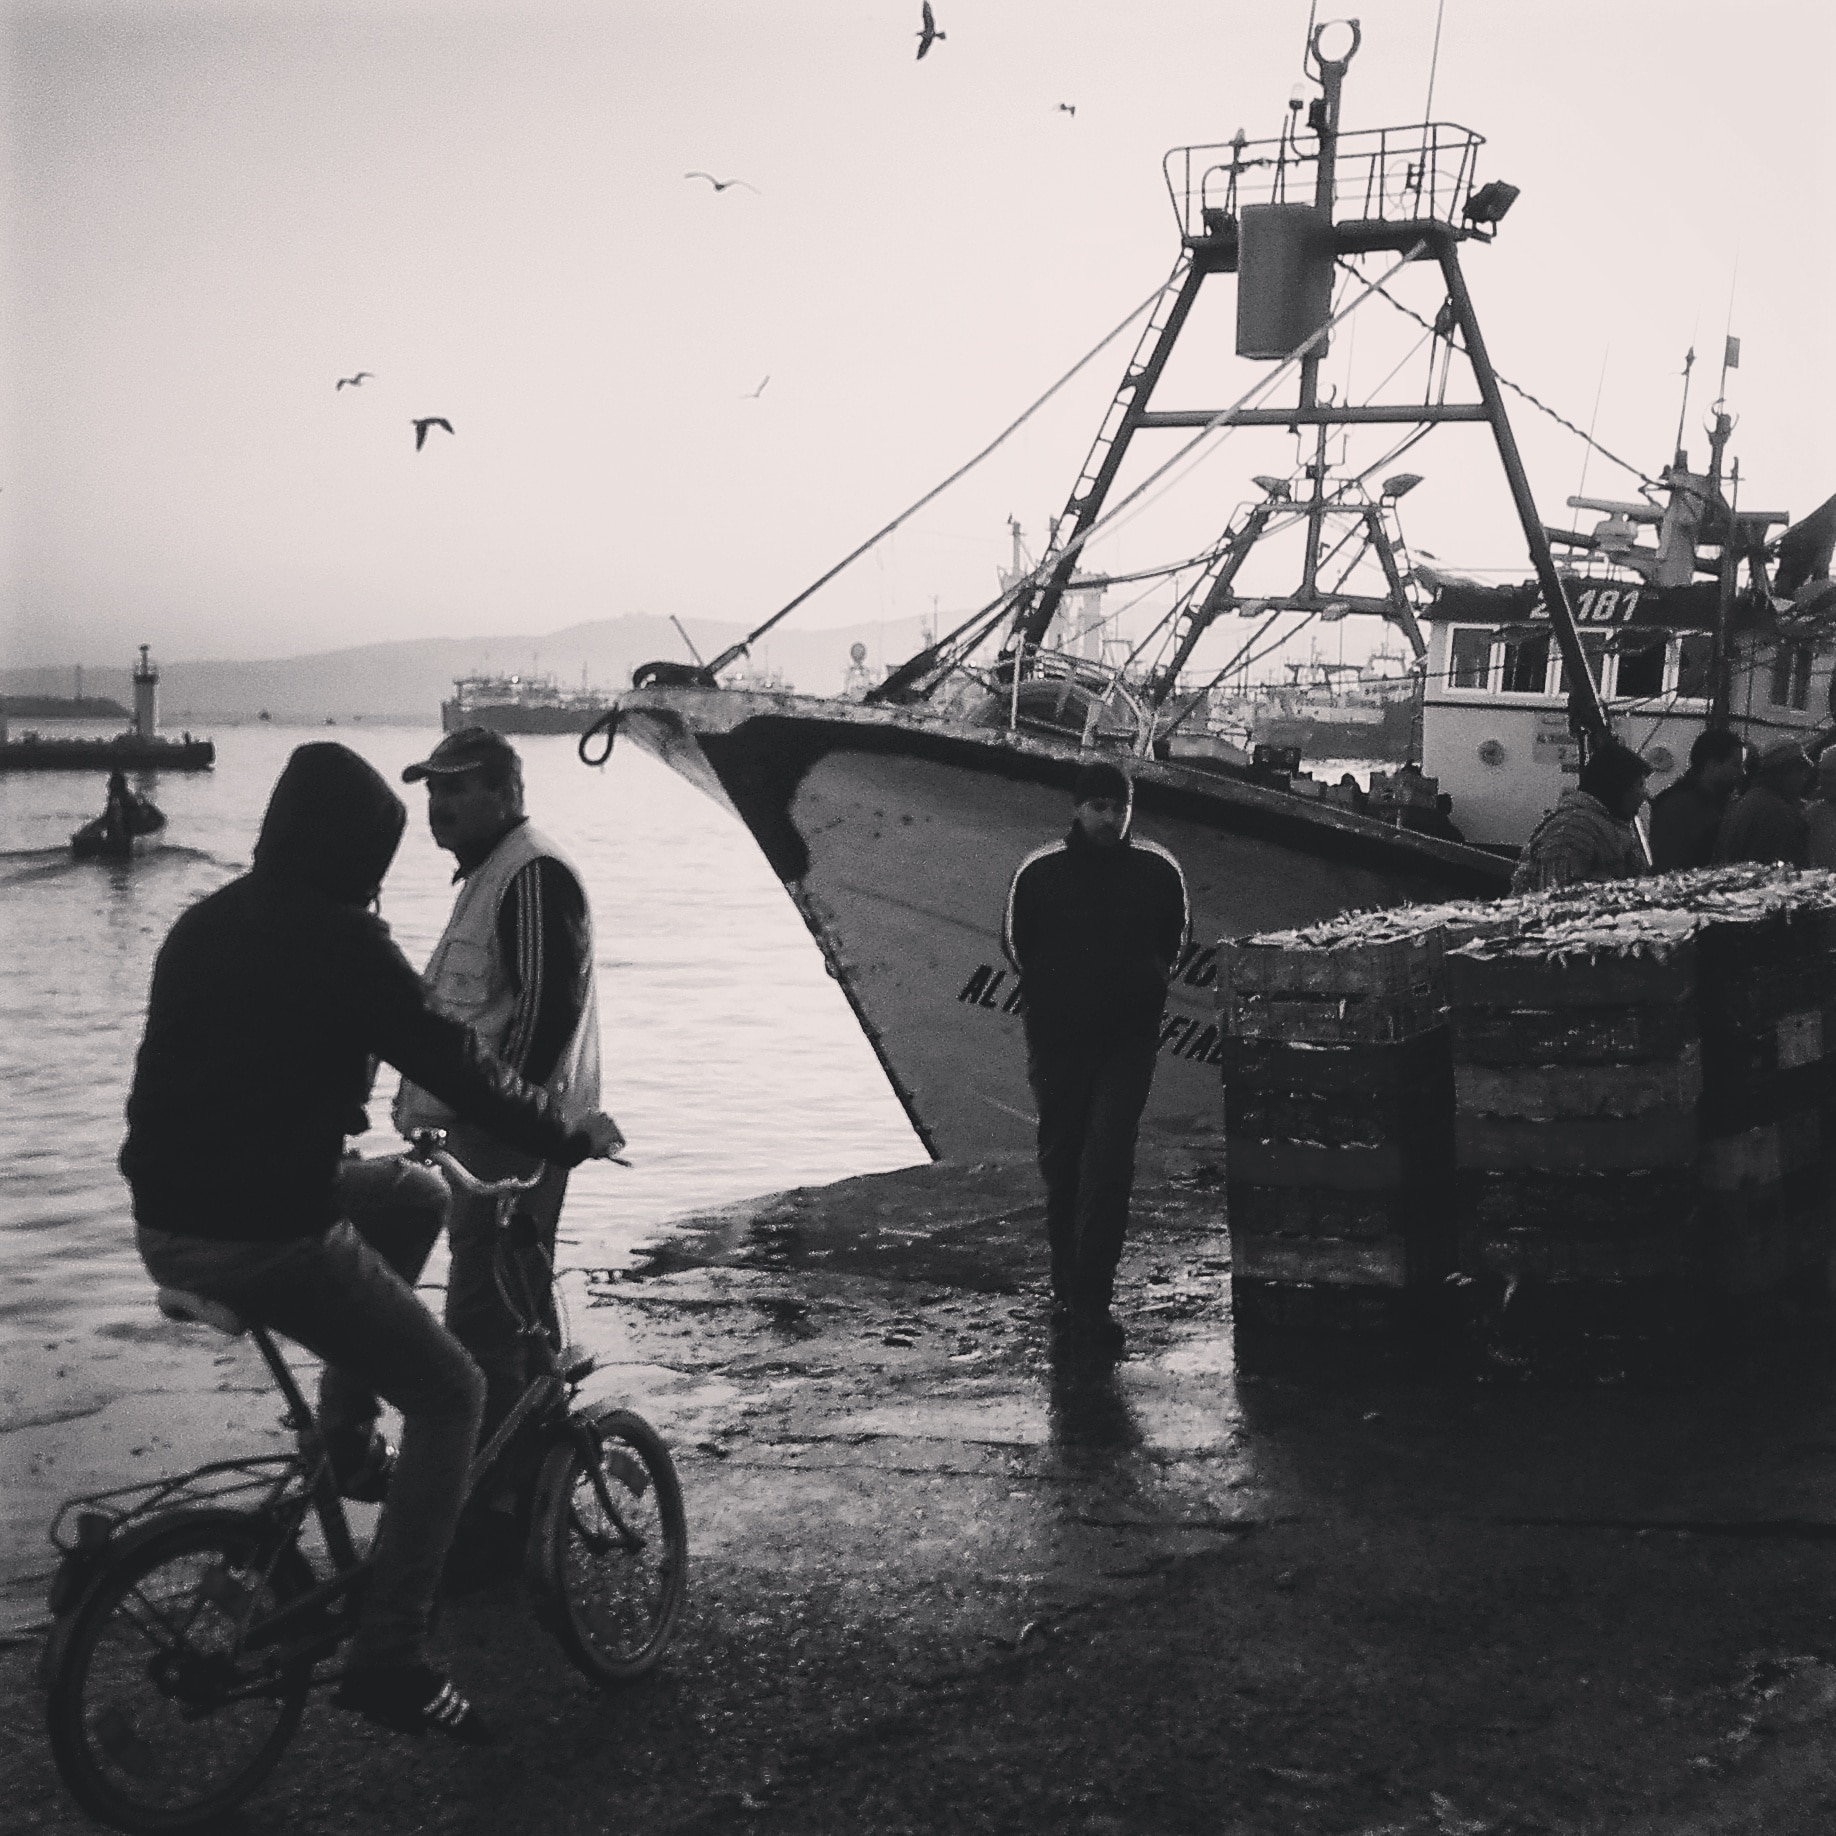 He who rises early, benefits😃
Tangier's port gets crazy when the fish market is in full swing...chaotic but amazing😃
#Tangier #tangiers #Morocco #market #port #fishermen #chaotic #fresh #morocco #now #early #wander #people #moroccan
#travel #black #white #boats #fishing 